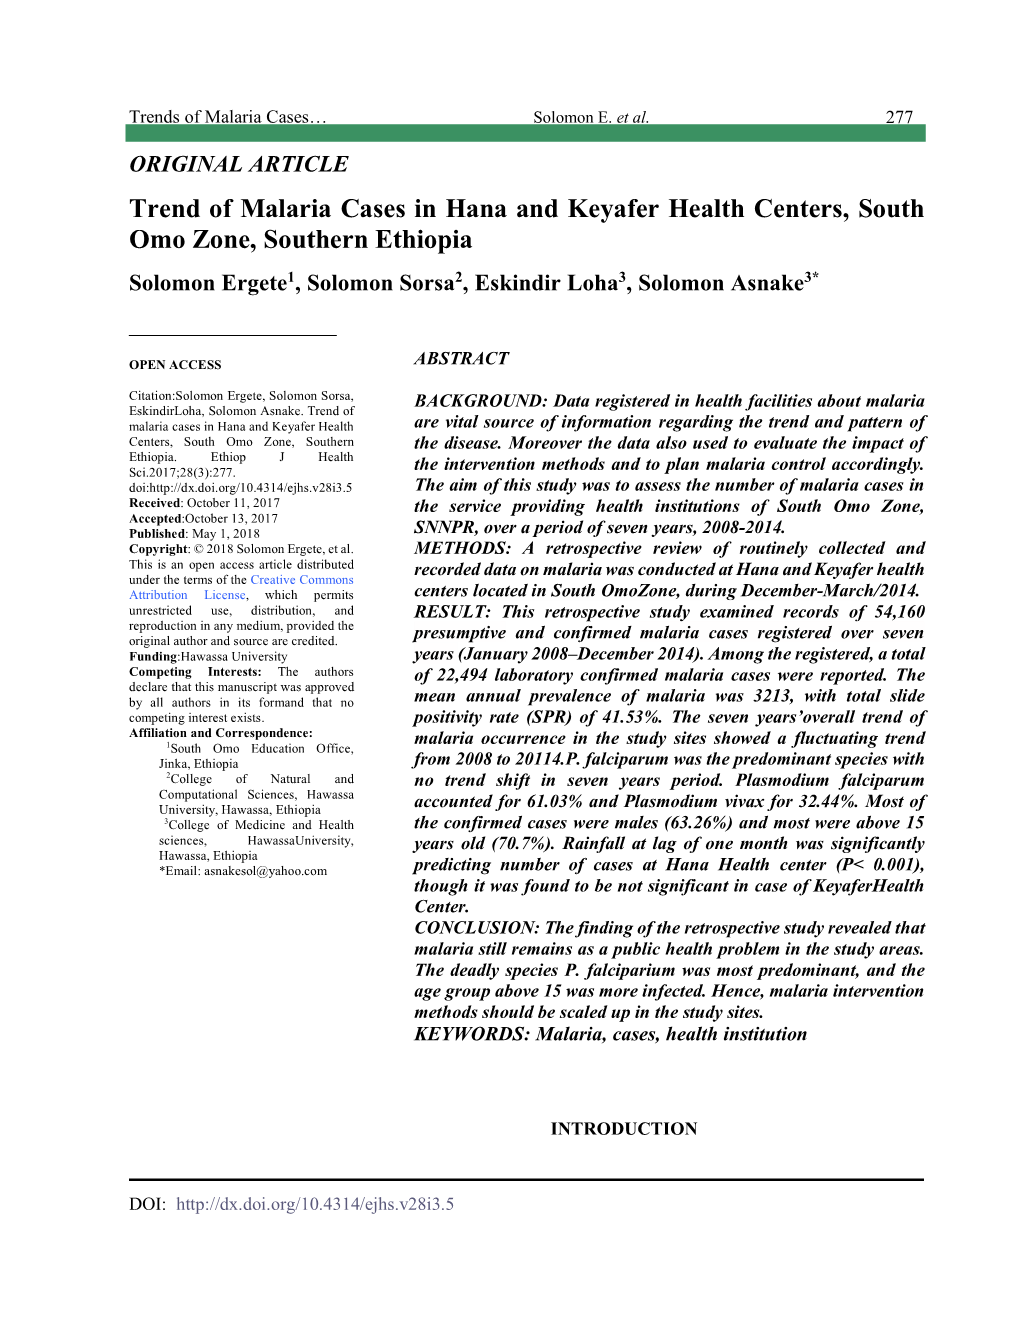 Trend of Malaria Cases in Hana and Keyafer Health Centers, South Omo Zone, Southern Ethiopia